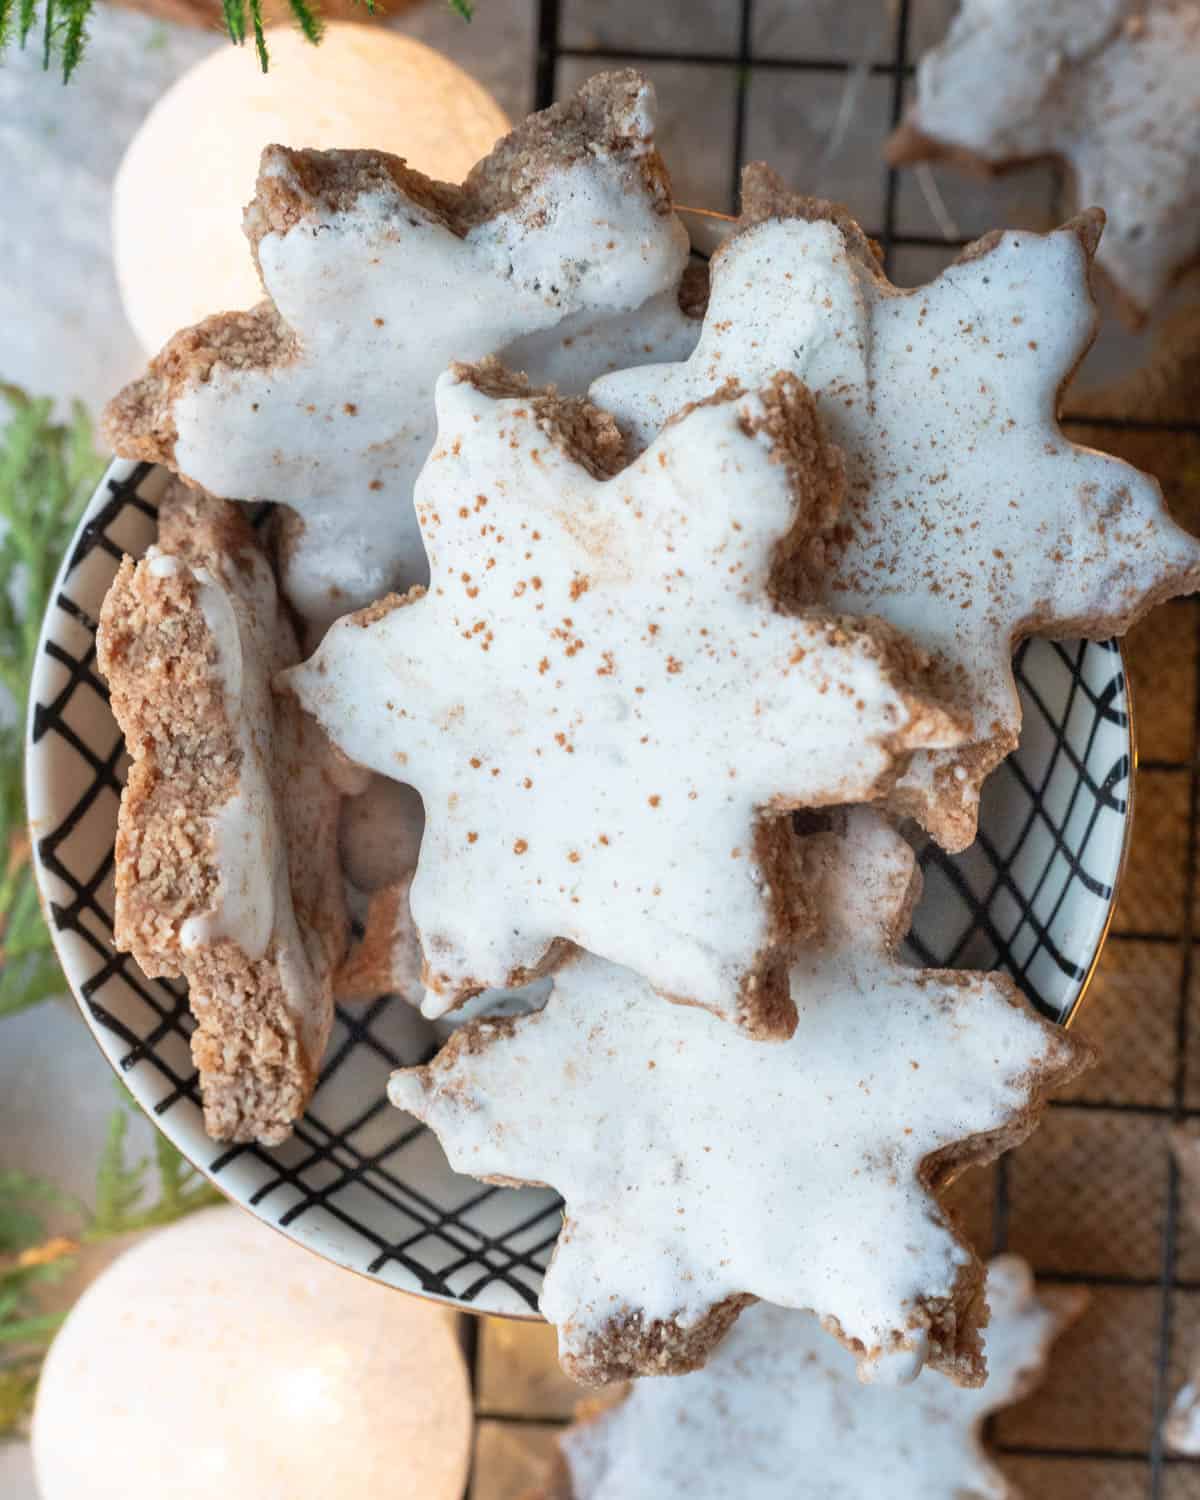 Vegan Zimtsterne cookies nestled in a black basket, showing off the white icing and cinnamon sprinkle, with a warm and cozy Christmas ambiance in the background.